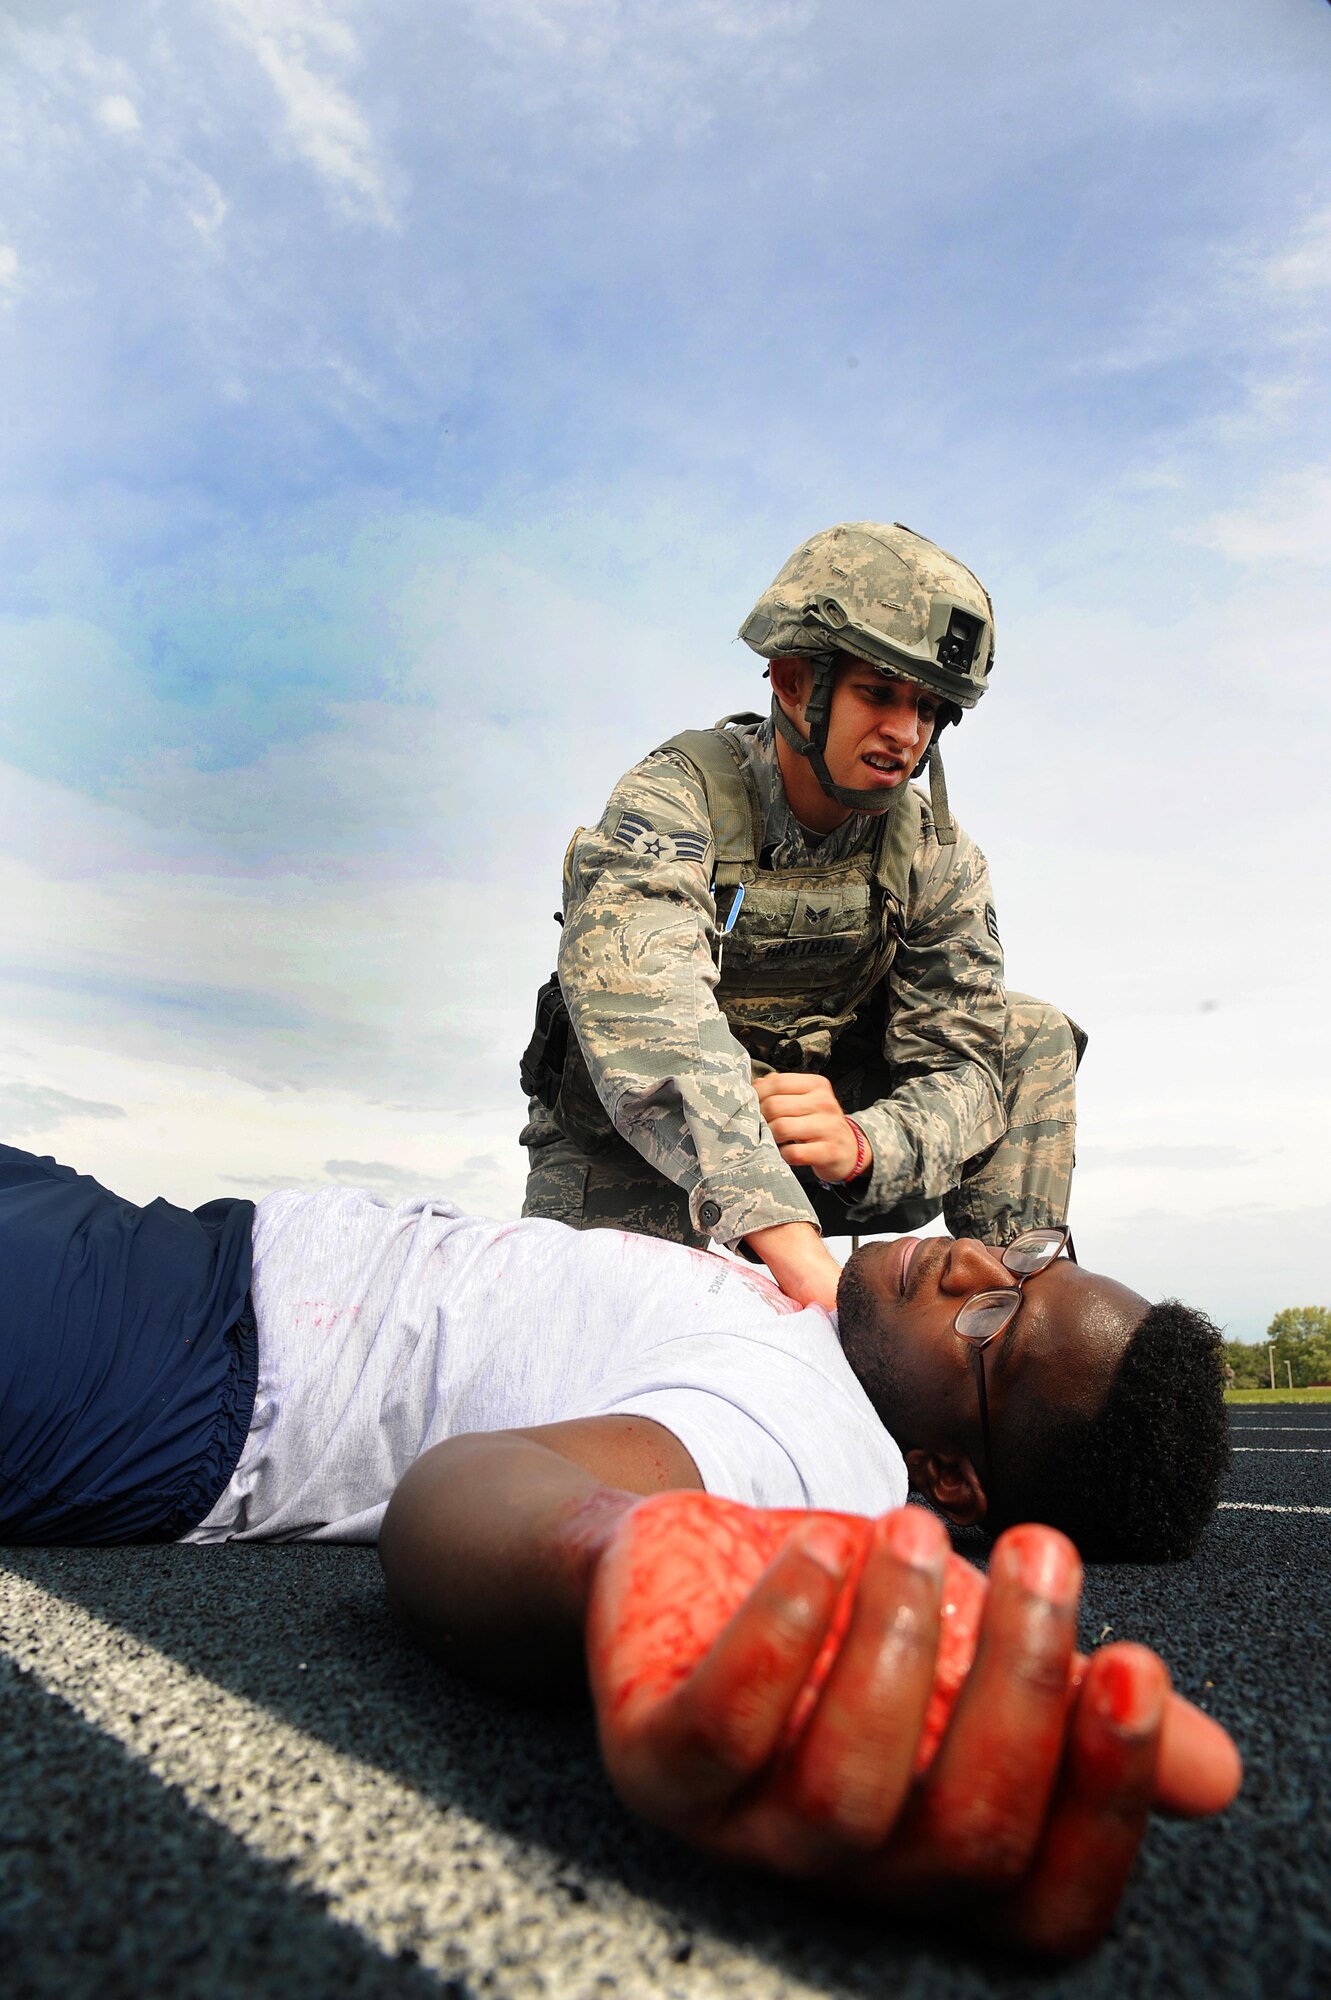 U.S. Air Force Senior Airman Kevin Hartman, a 509th Security Forces Squadron training instructor, checks Staff Sgt. Ramel Waden, a 509th Munitions Squadron unit training manager, for a pulse during an active shooter exercise at Whiteman Air Force Base, Mo., Aug. 5, 2016. The bi-annual exercise helps Whiteman personnel practice and train proper response procedures in order to reduce the risk of harm and provide direction for all base personnel in an active shooter situation.